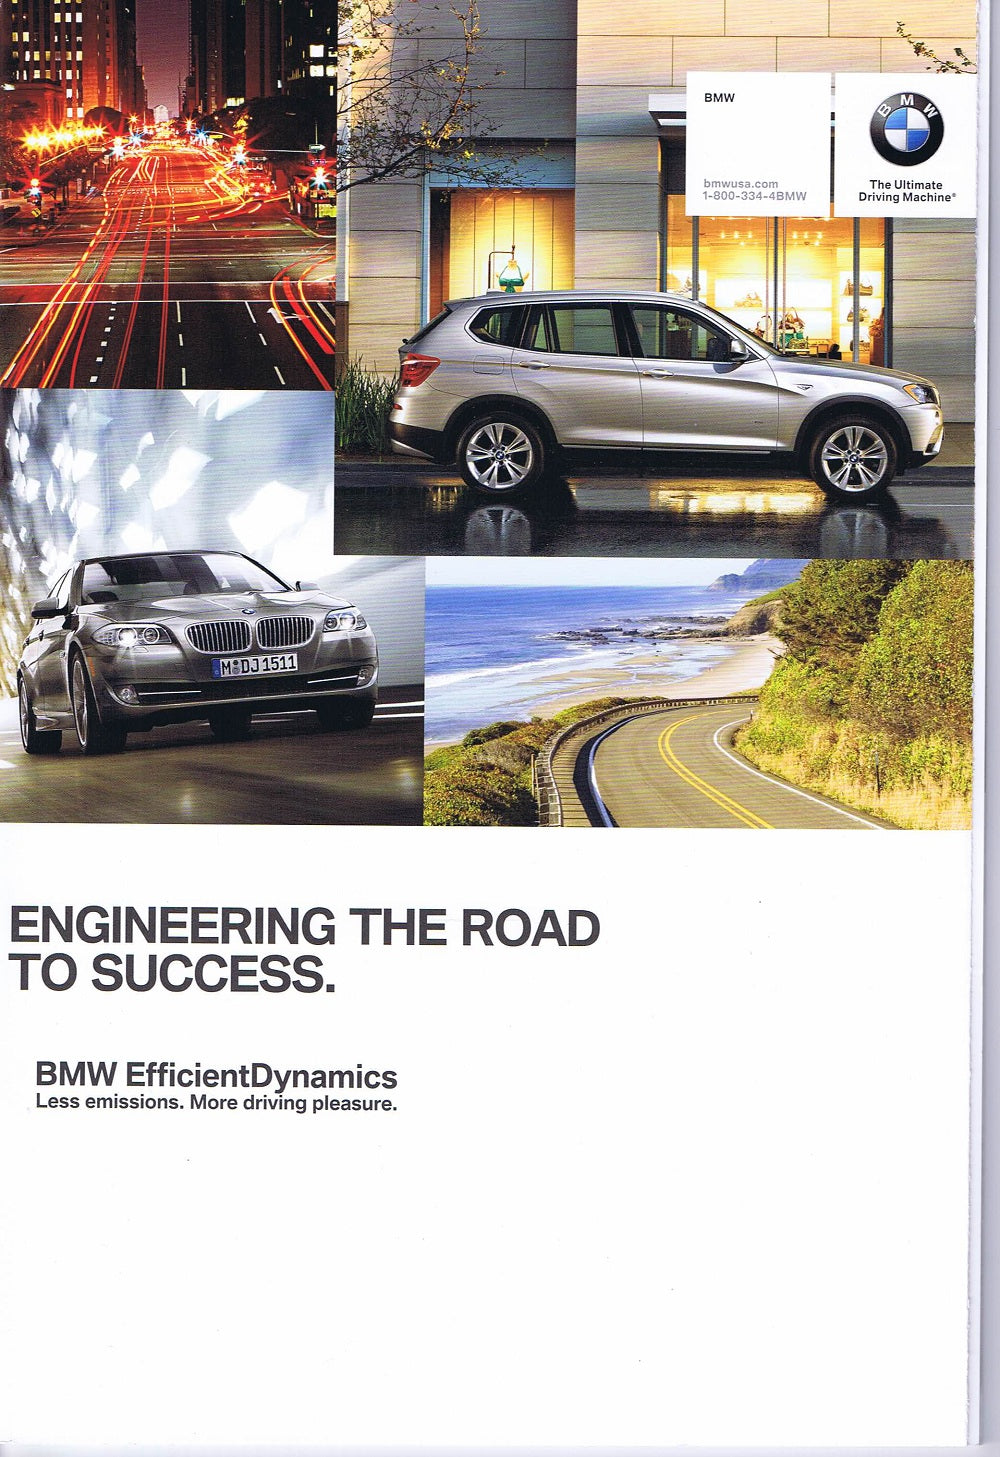 Brochure - Engineering the Road to Success. BMW Efficient Dynamics Less emissions. More driving pleasure - 2011 Full Line